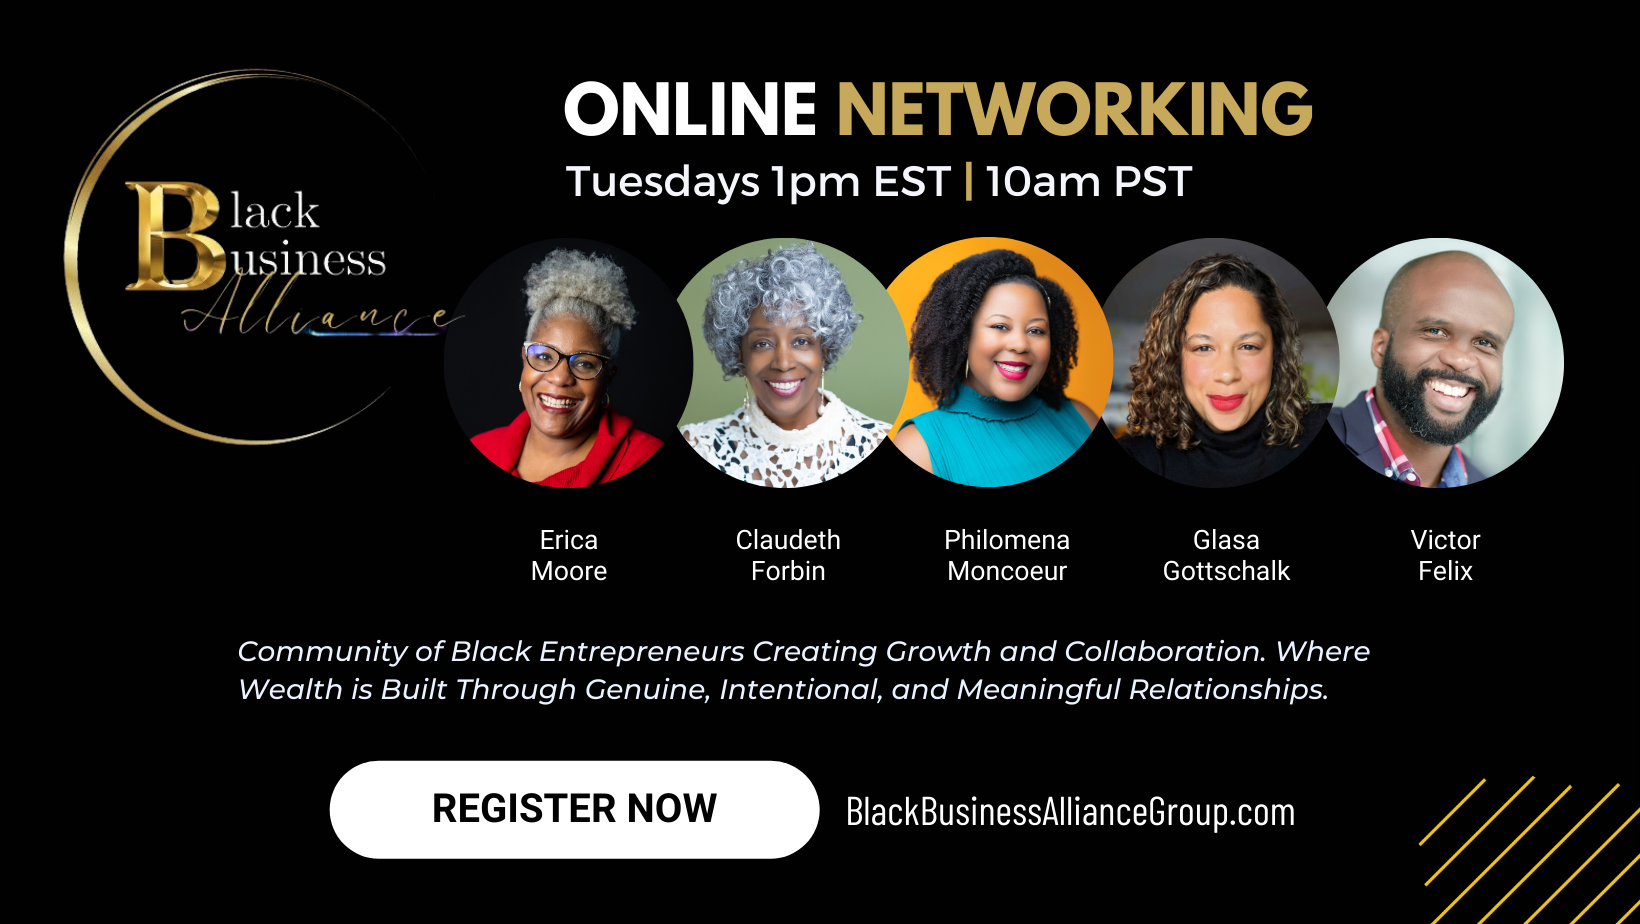 Black Business Alliance Weekly Networking Online